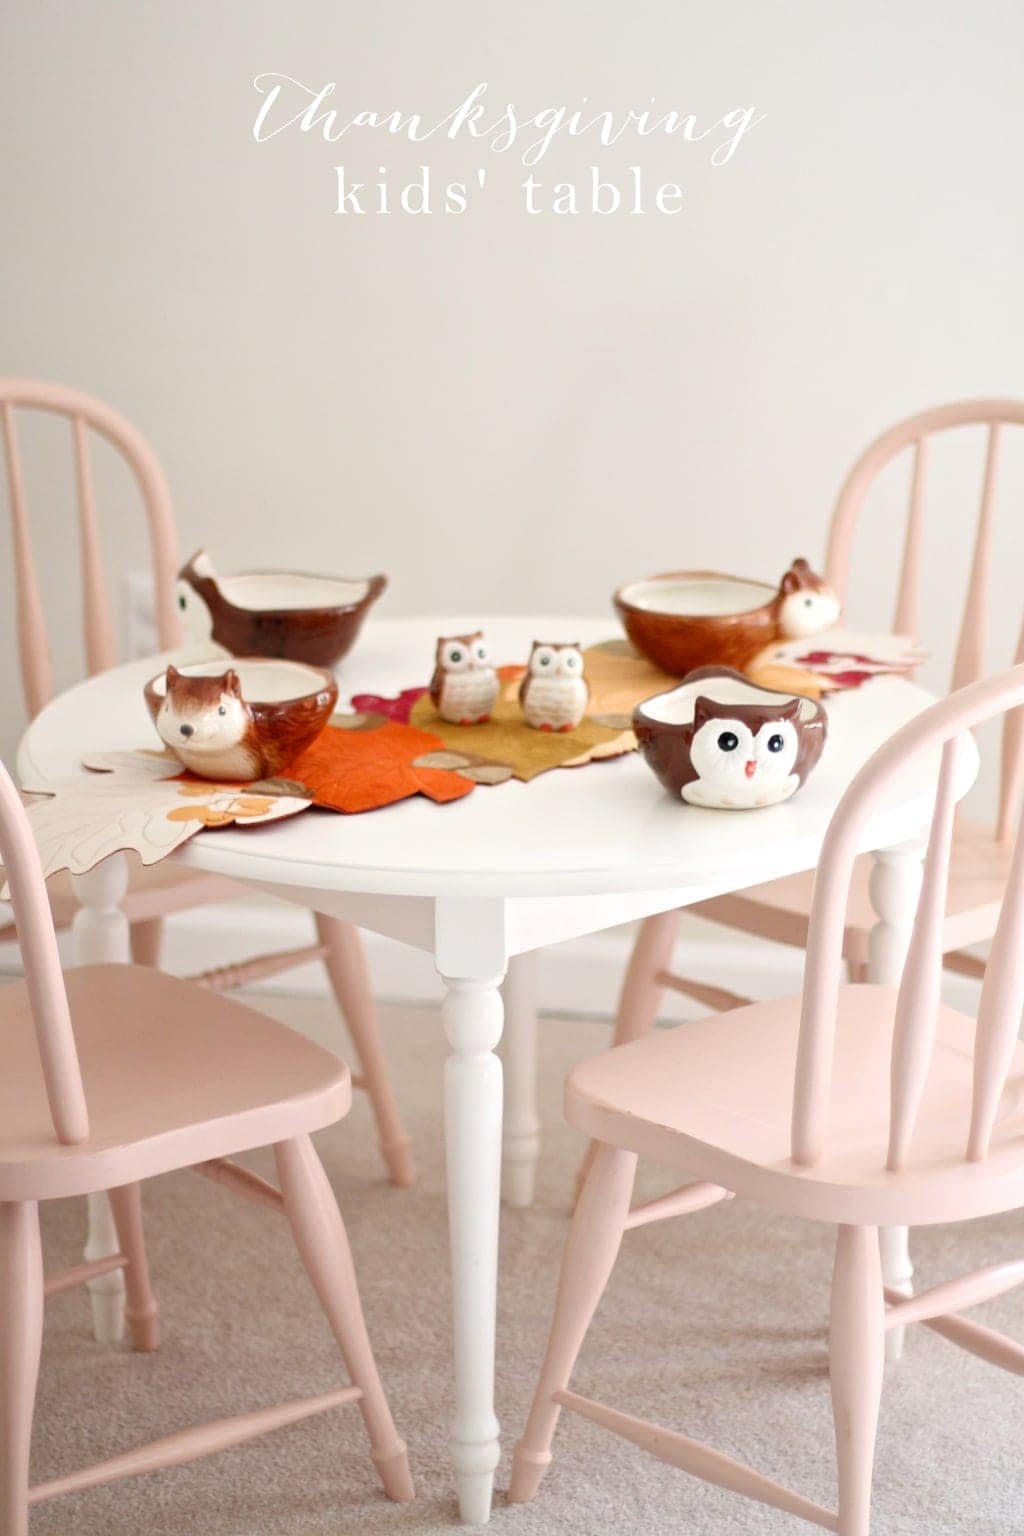 Thanksgiving kids' table set with fall decor and pink chairs.